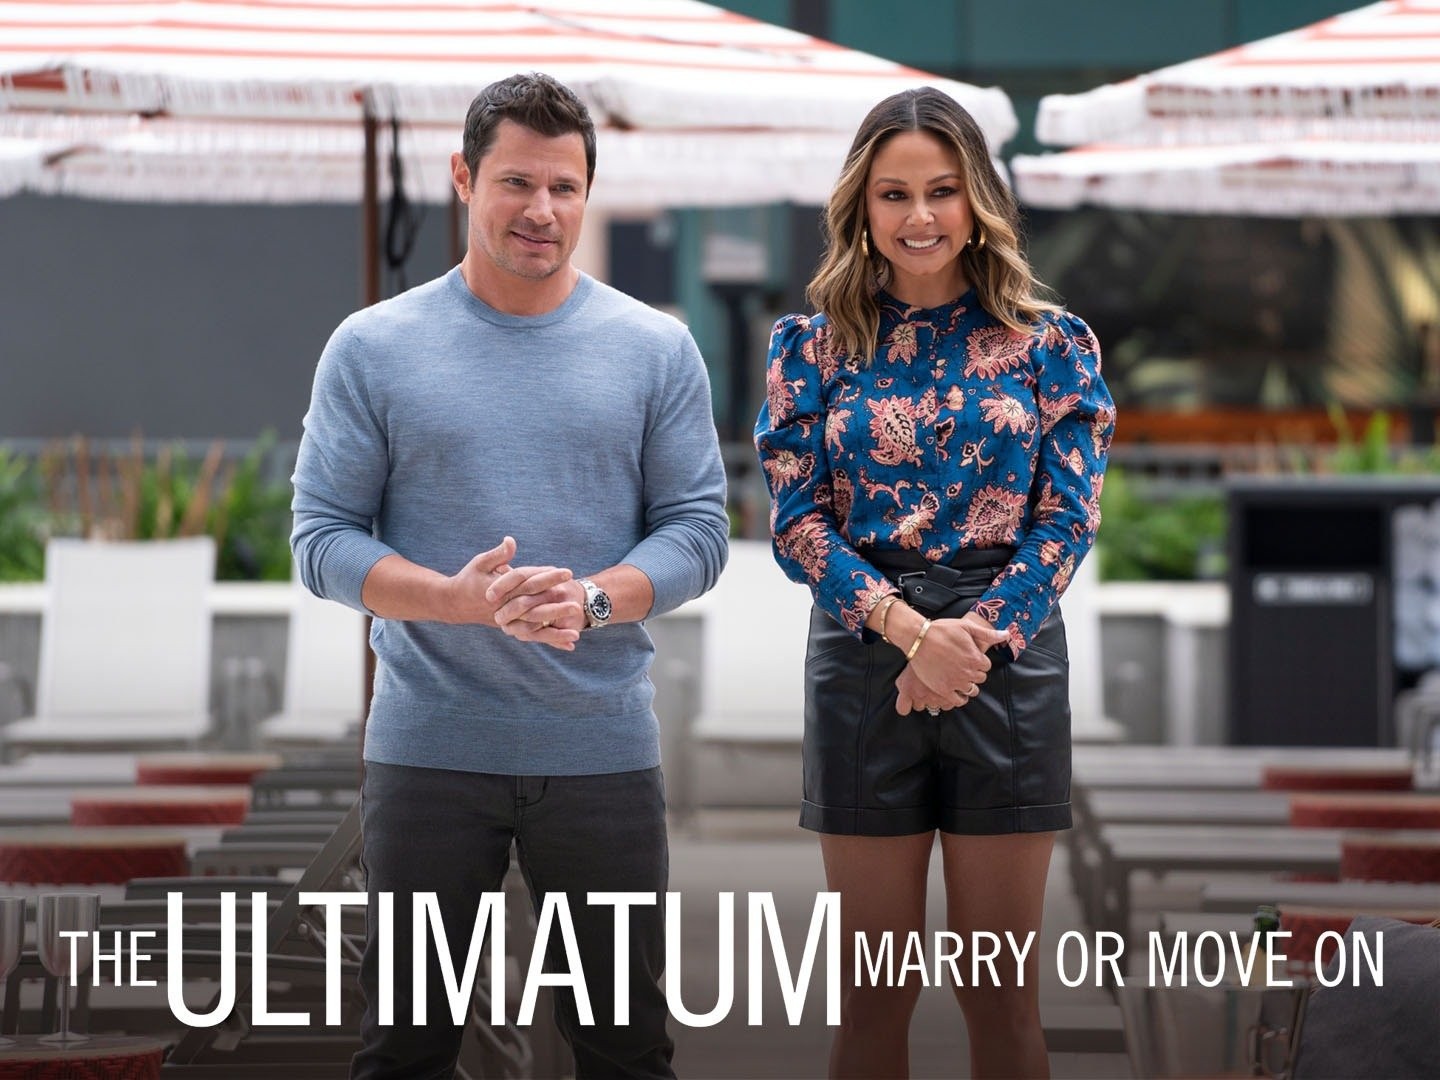 The Ultimatum: Marry or Move On Season 3: Everything We Know